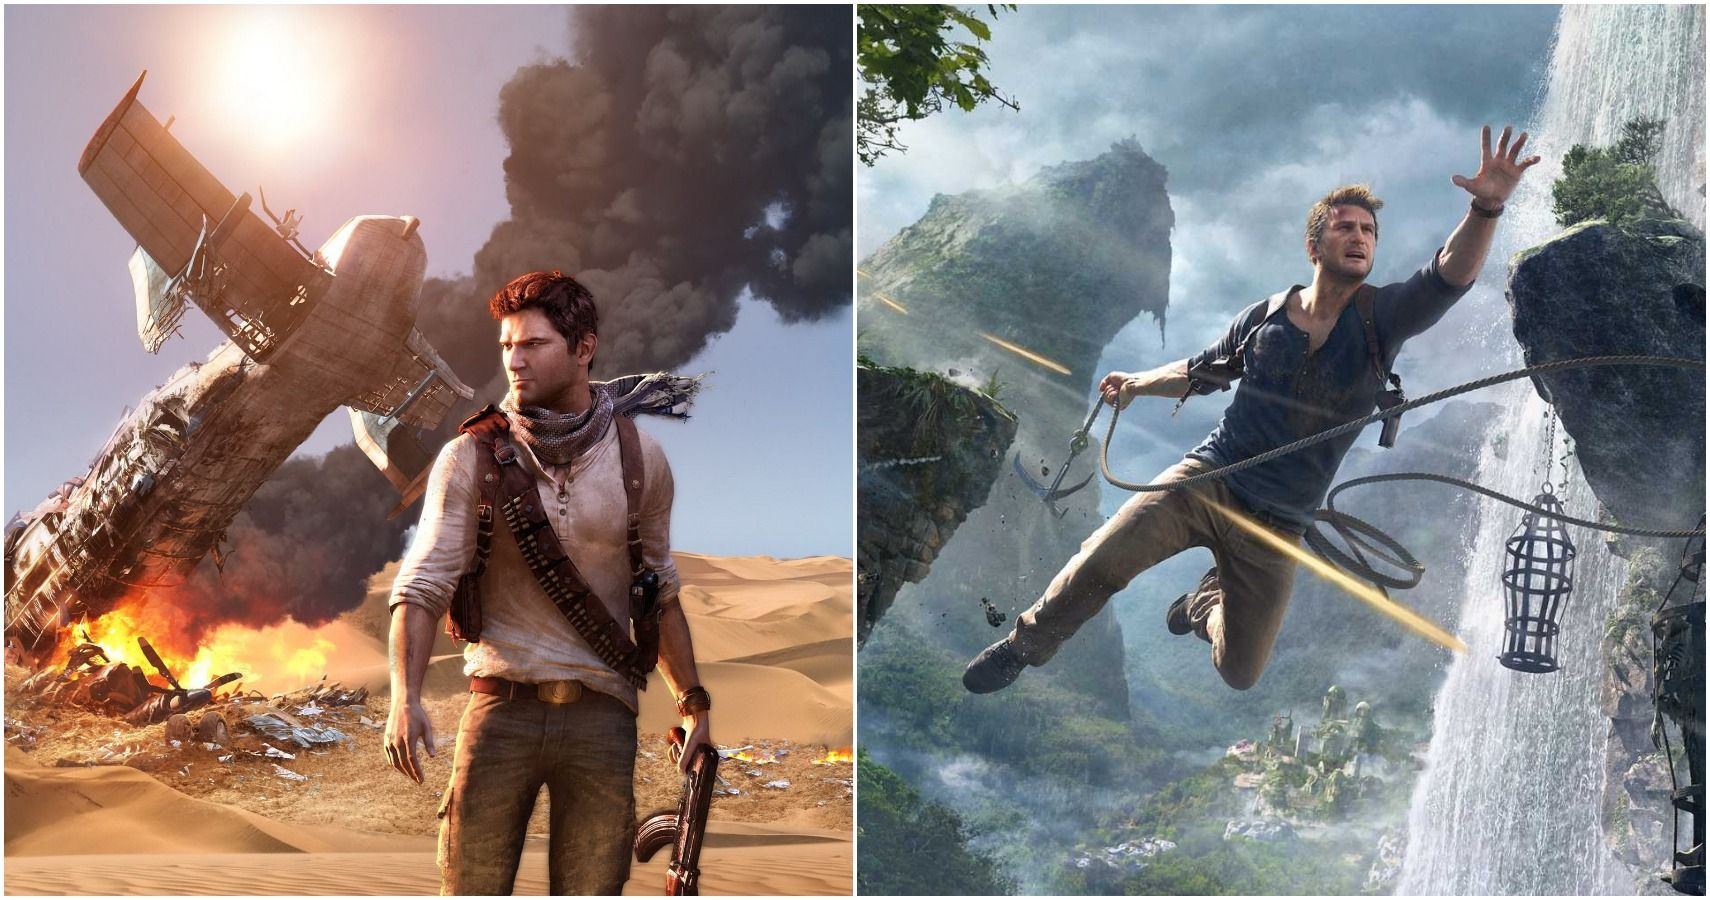 The Most Incredible Moments In 'Uncharted 4